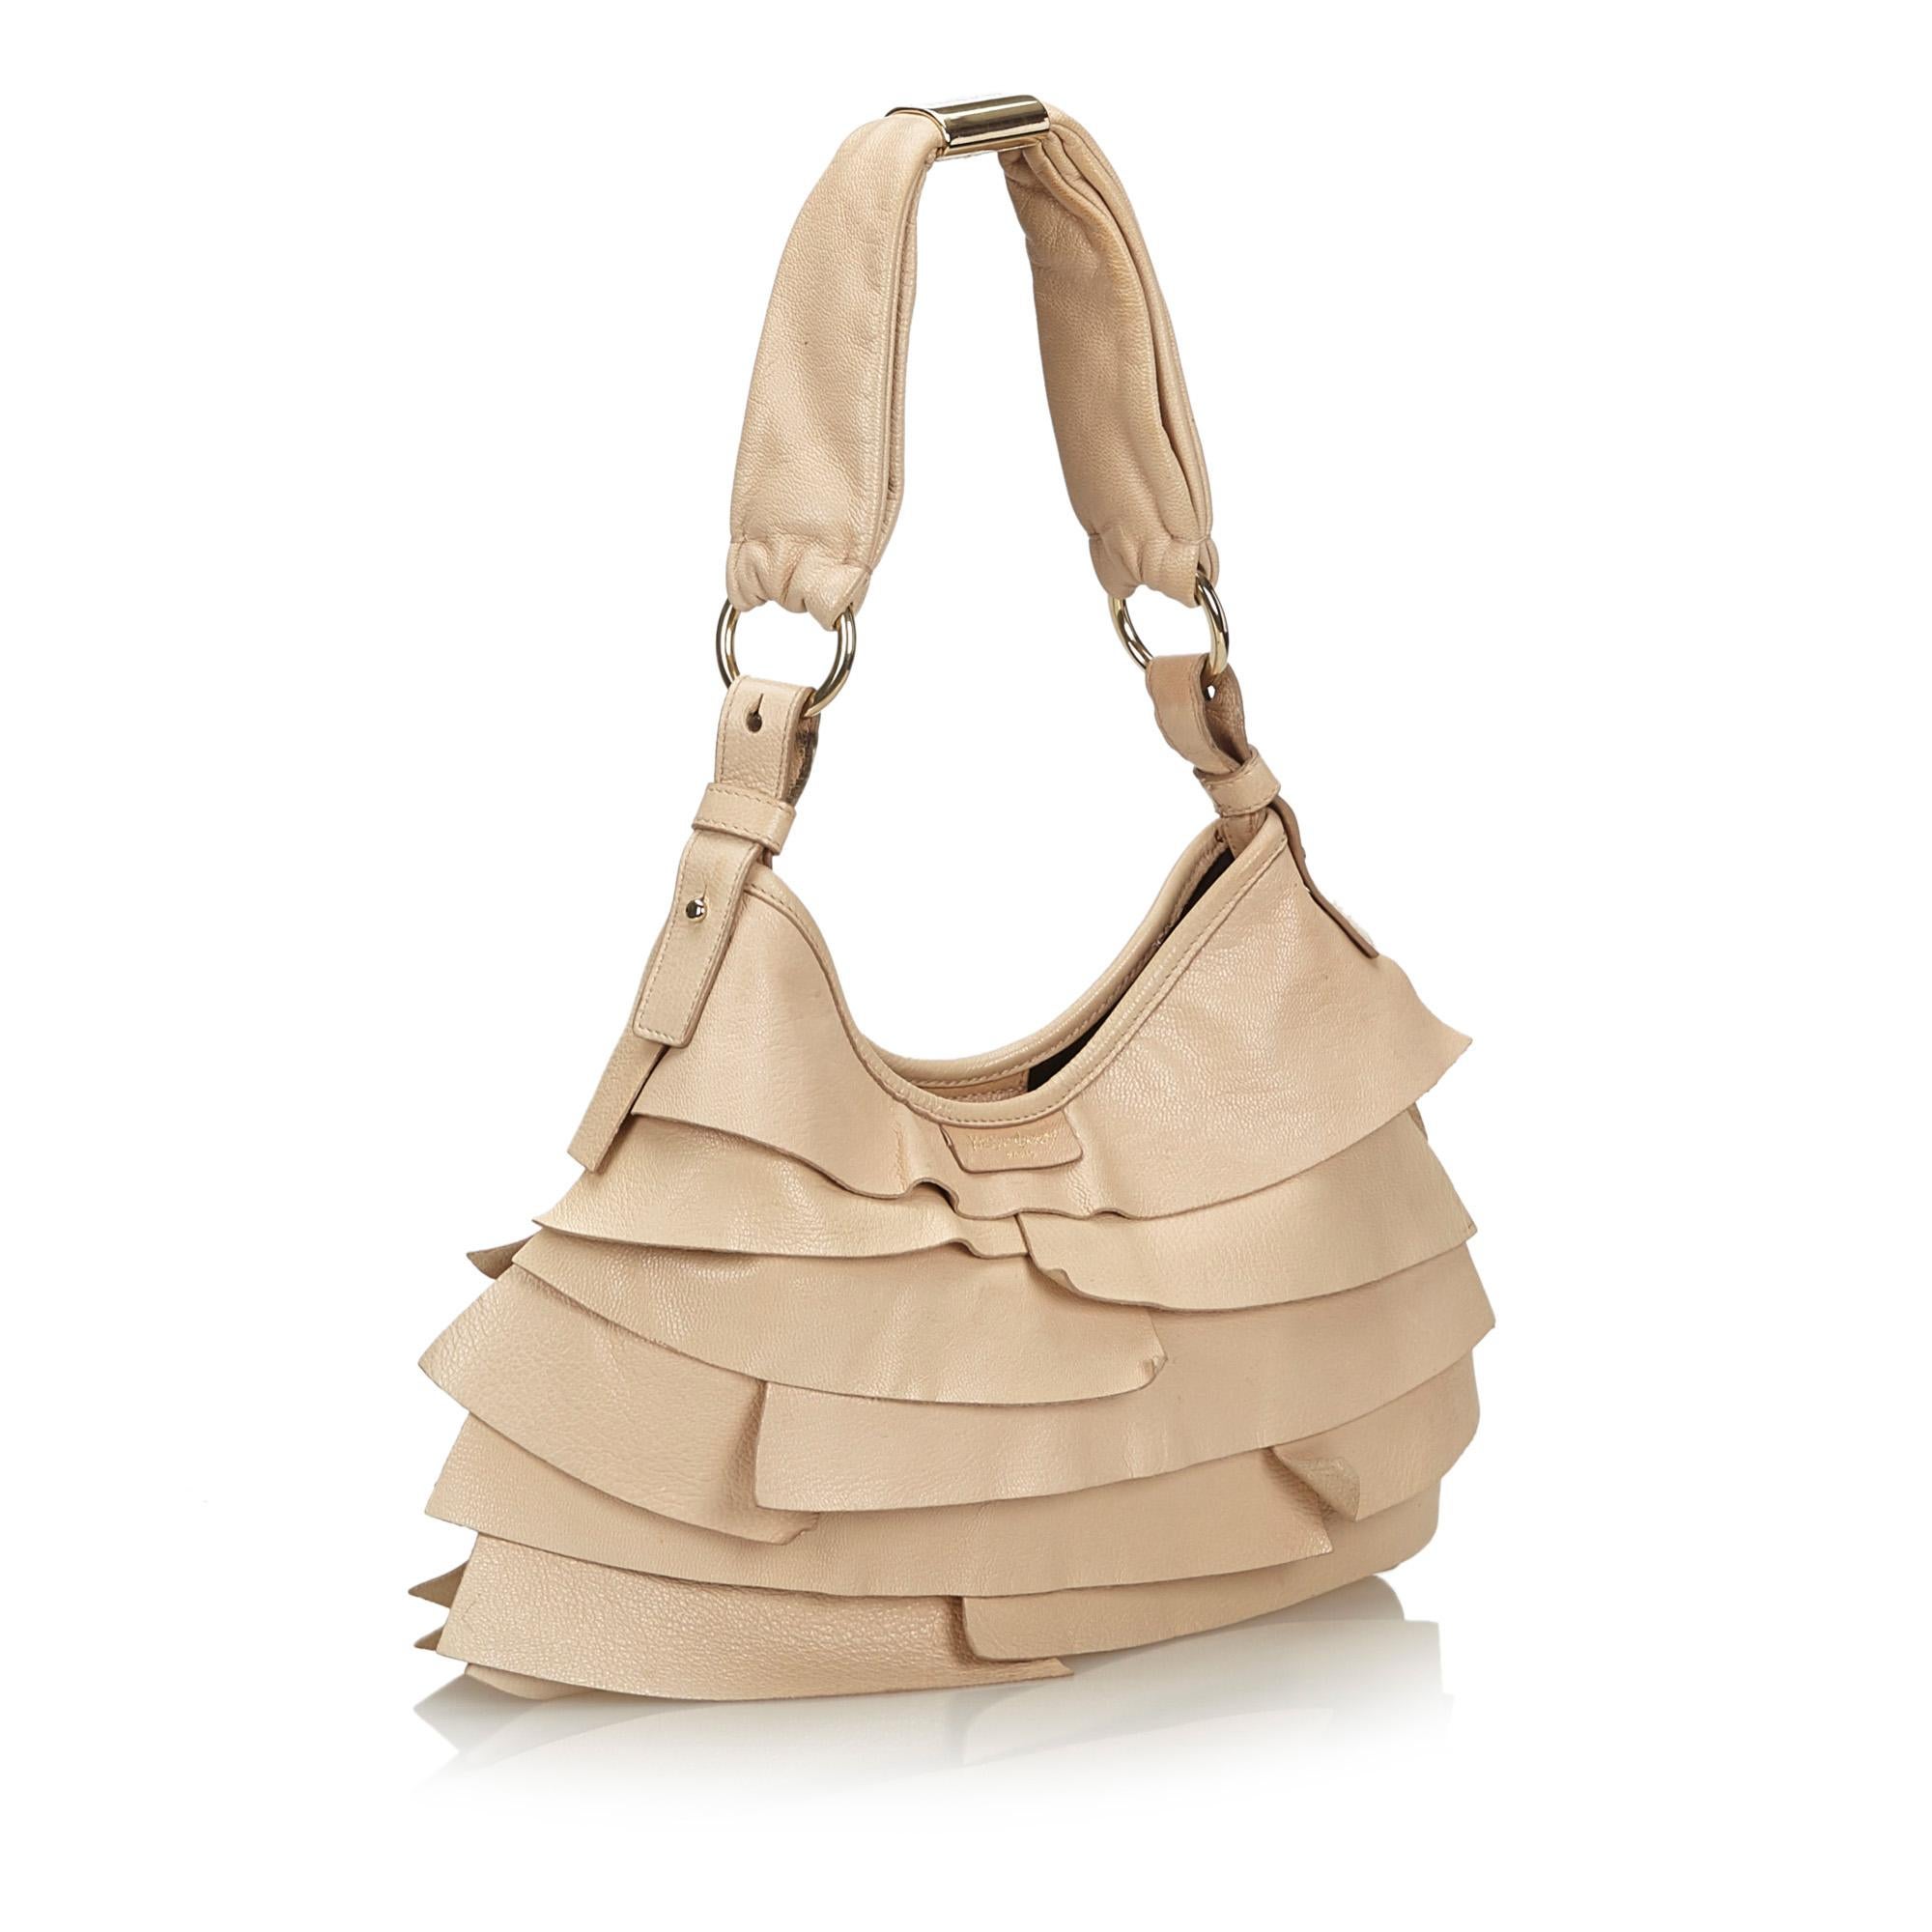 The Saint Tropez features a ruffled leather body, a leather strap, a top magnetic closure, and interior zip and slip pockets. It carries as B+ condition rating.

Inclusions: 
This item does not come with inclusions.

Dimensions:
Length: 23.00